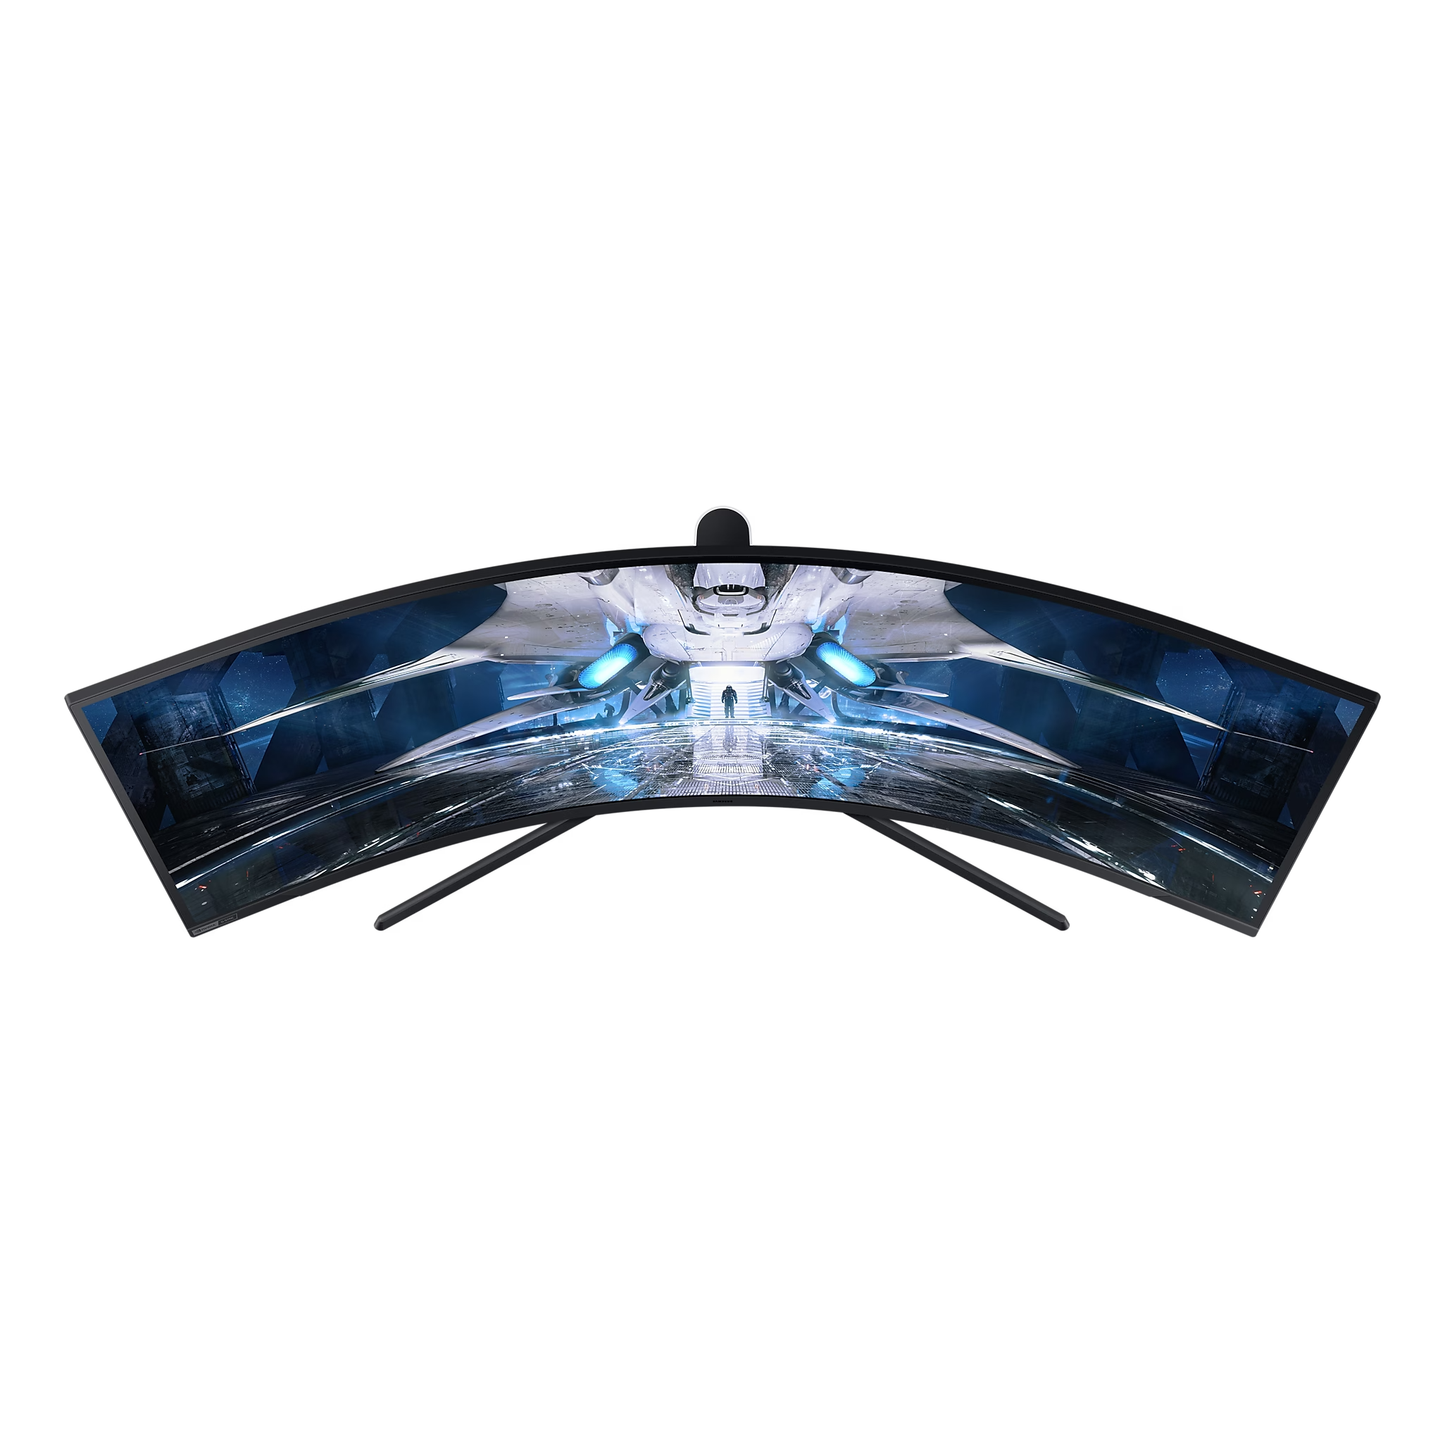 Samsung Odyssey Neo G9 49-inch Curved Gaming Monitor